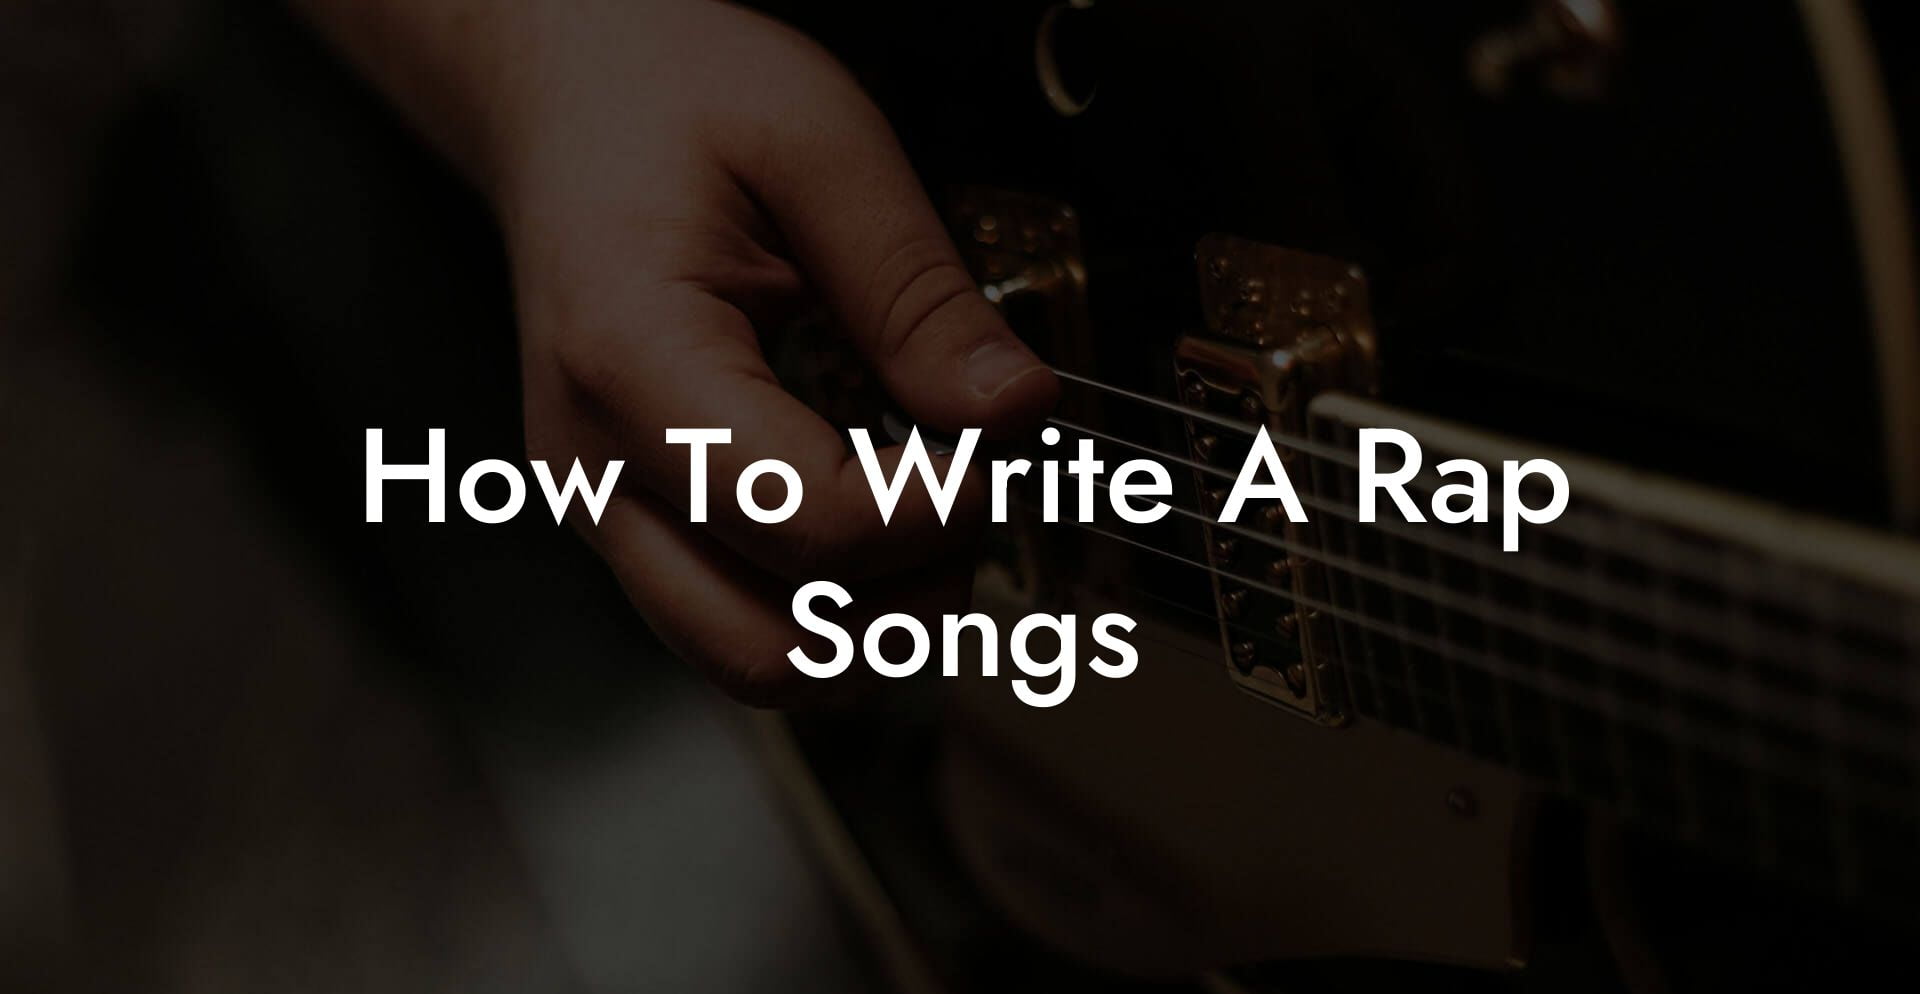 how to write a rap songs lyric assistant